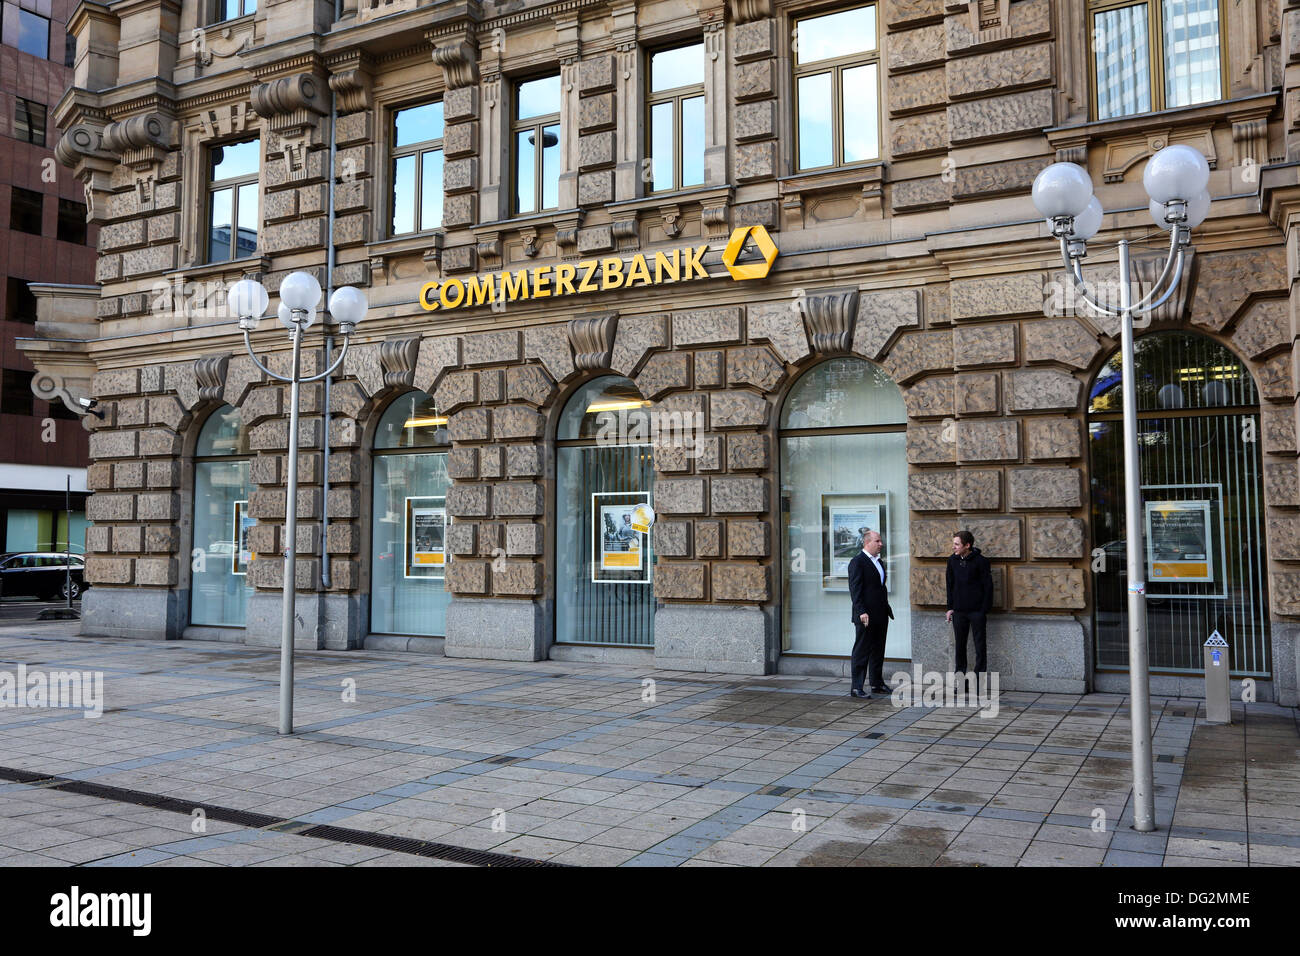 Commerzbank bank and logo in Frankfurt am Main, Germany Stock Photo